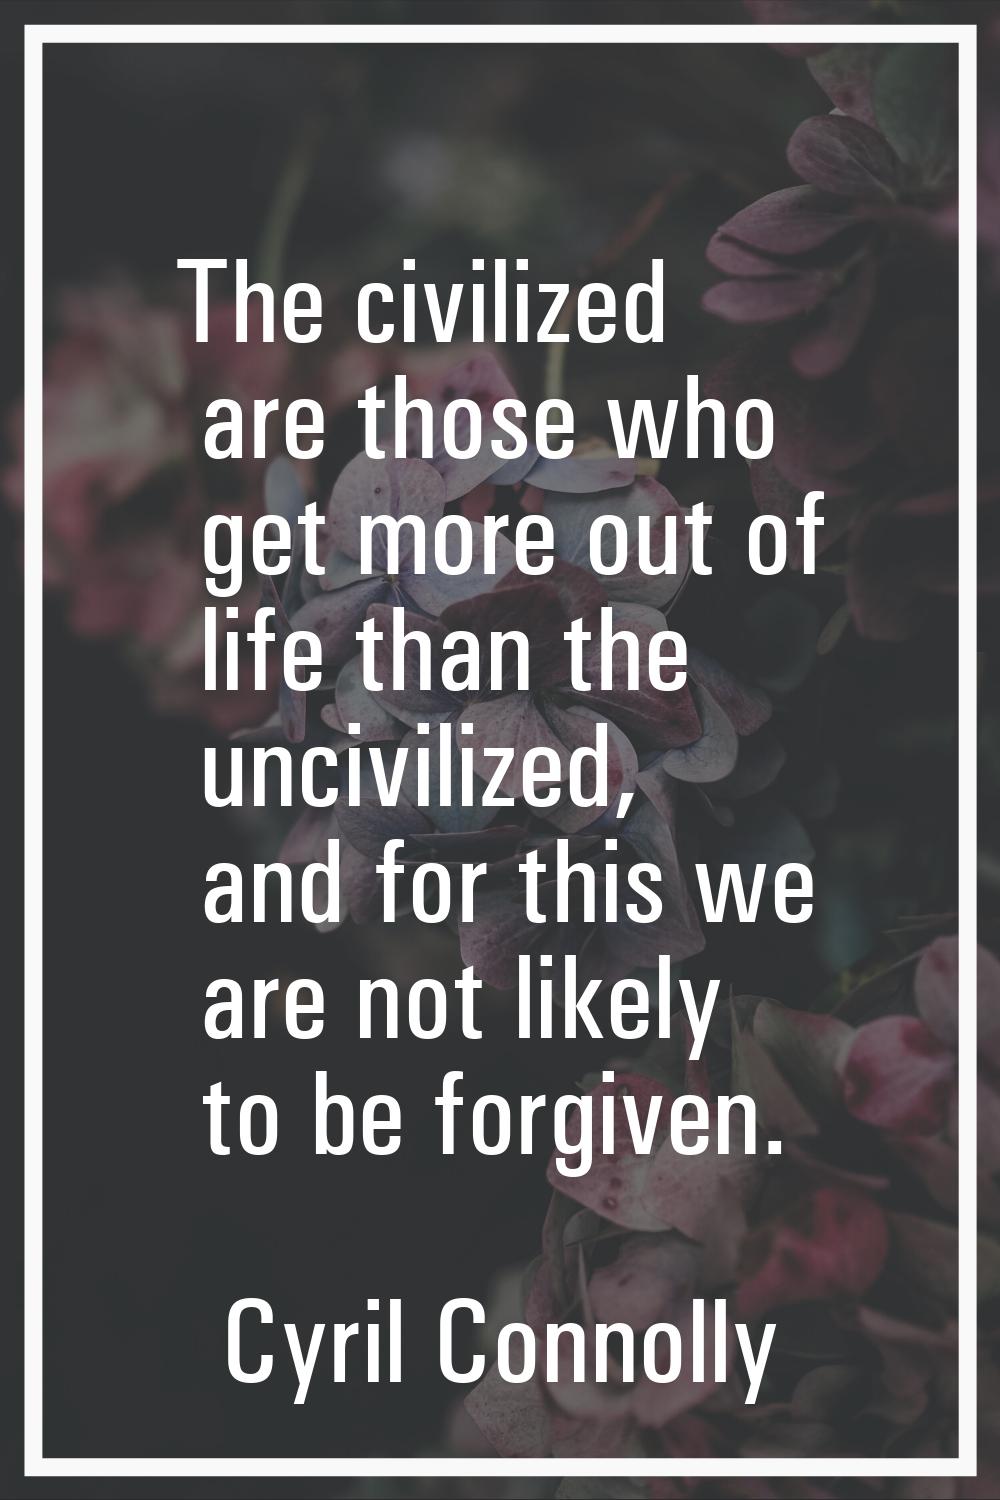 The civilized are those who get more out of life than the uncivilized, and for this we are not like